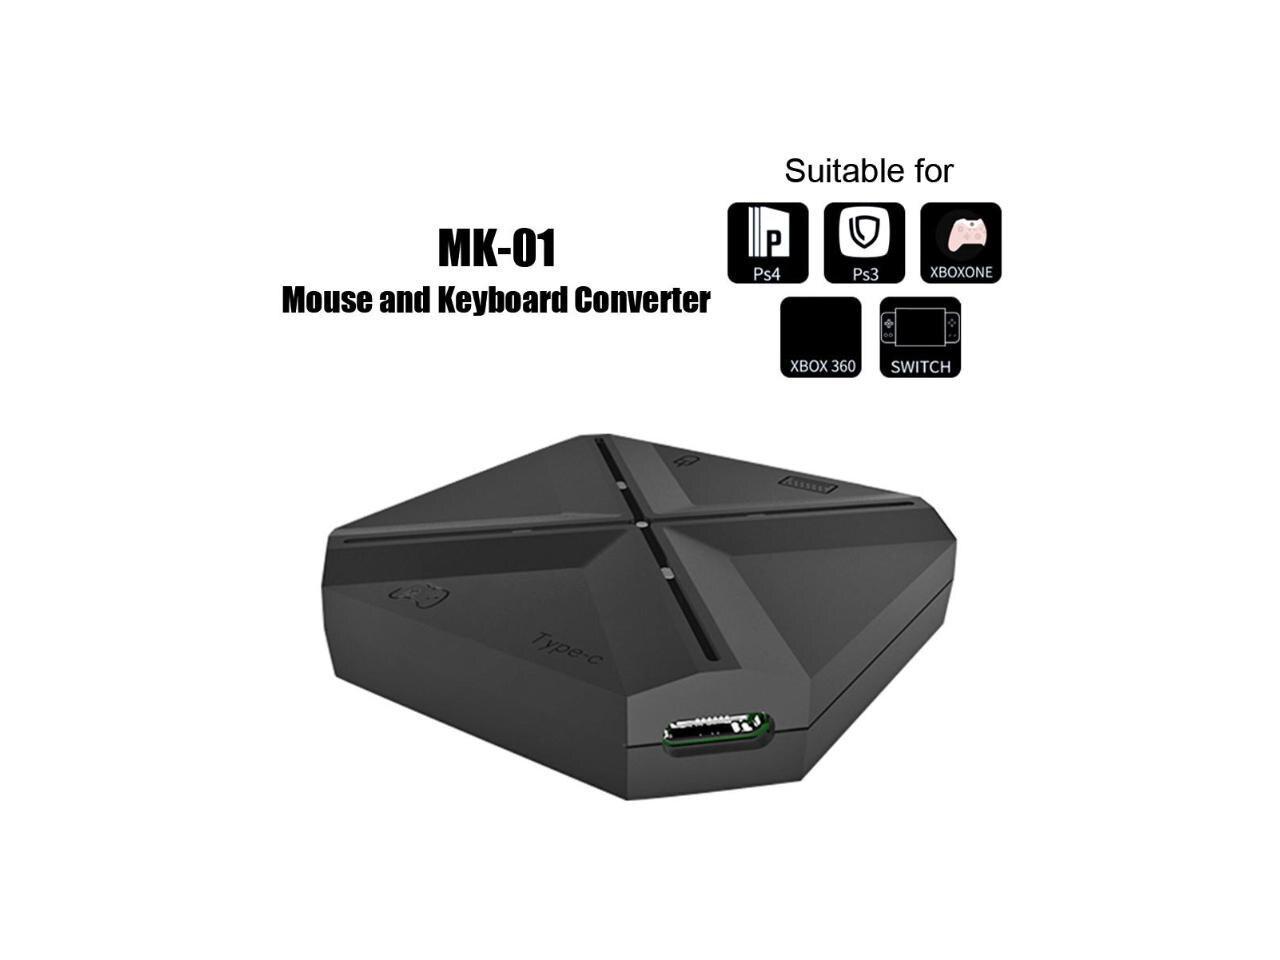 MK 01 Keyboard Mouse Converter Gamepad Controller Adapter Support for PS3 PS4 Xbox One Switch (1 pcs)